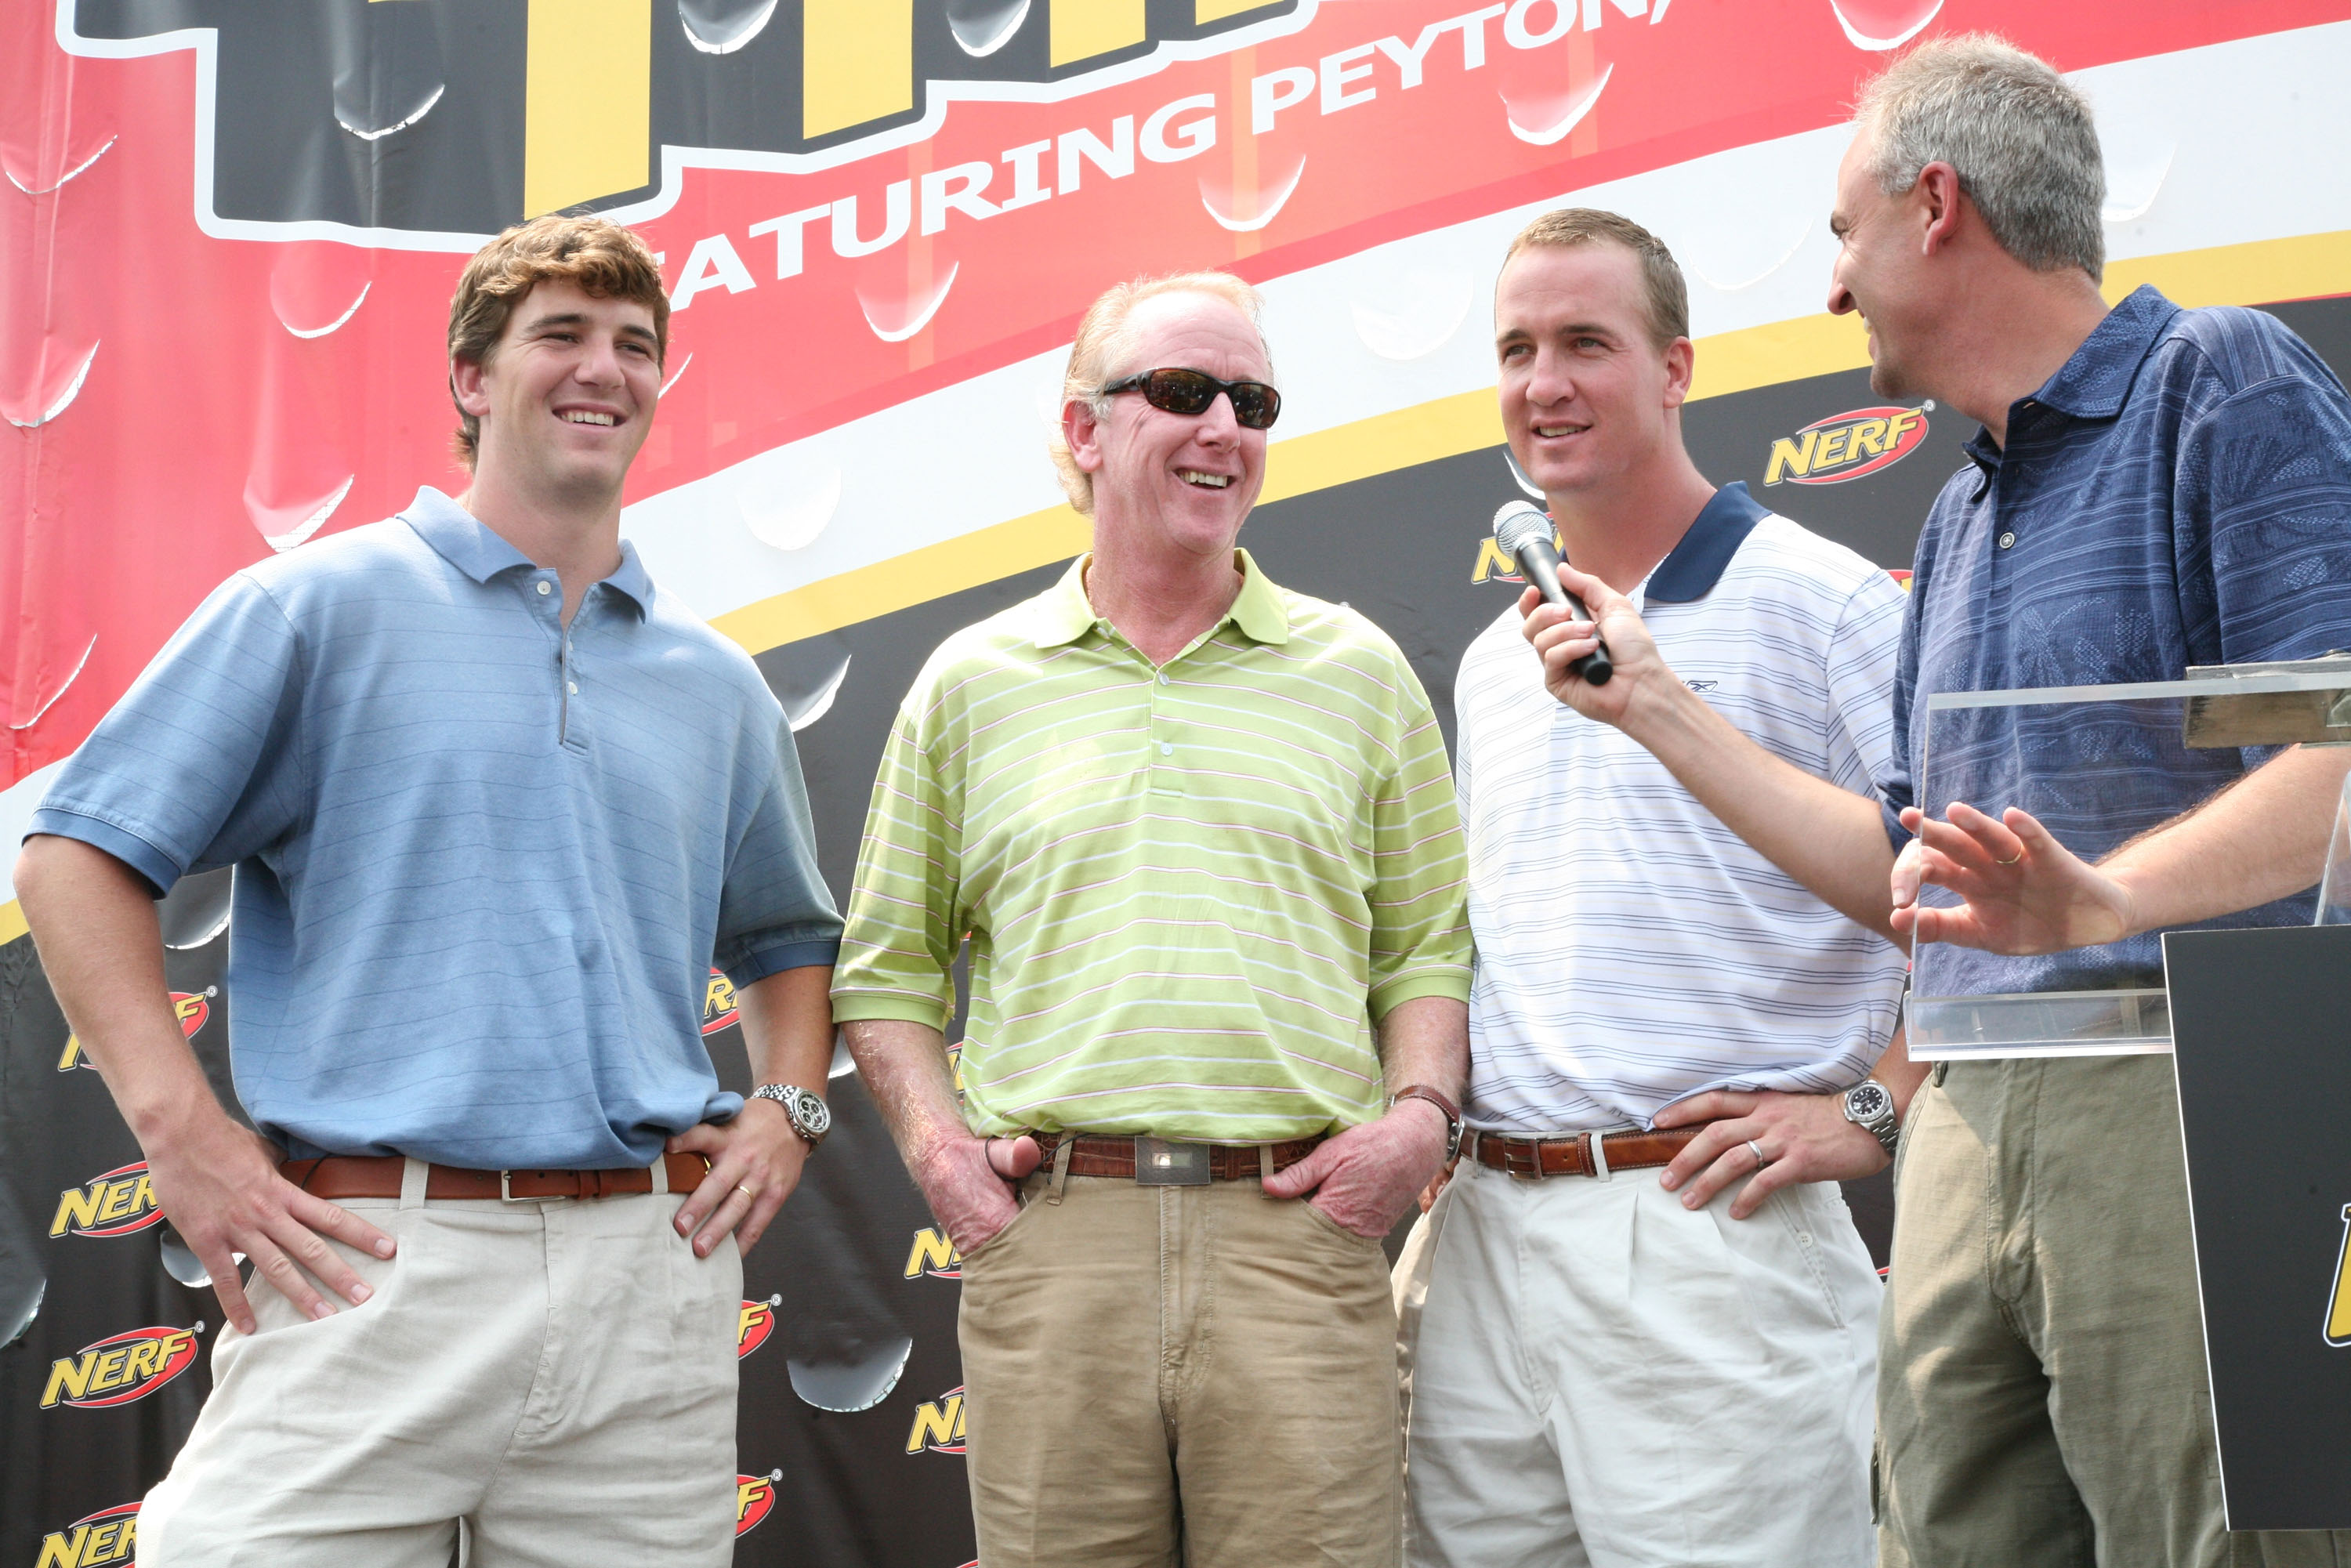 NEW YORK - JUNE 14:  (L-R) Archie Manning, New York Giants quarterback Eli Manning and Indianapolis Colts quarterback Peyton Manning attends the NERF Father's Day Football Throwdown on June 14, 2008 at Chelsea Piers in New York.  (Photo by Astrid Stawiarz